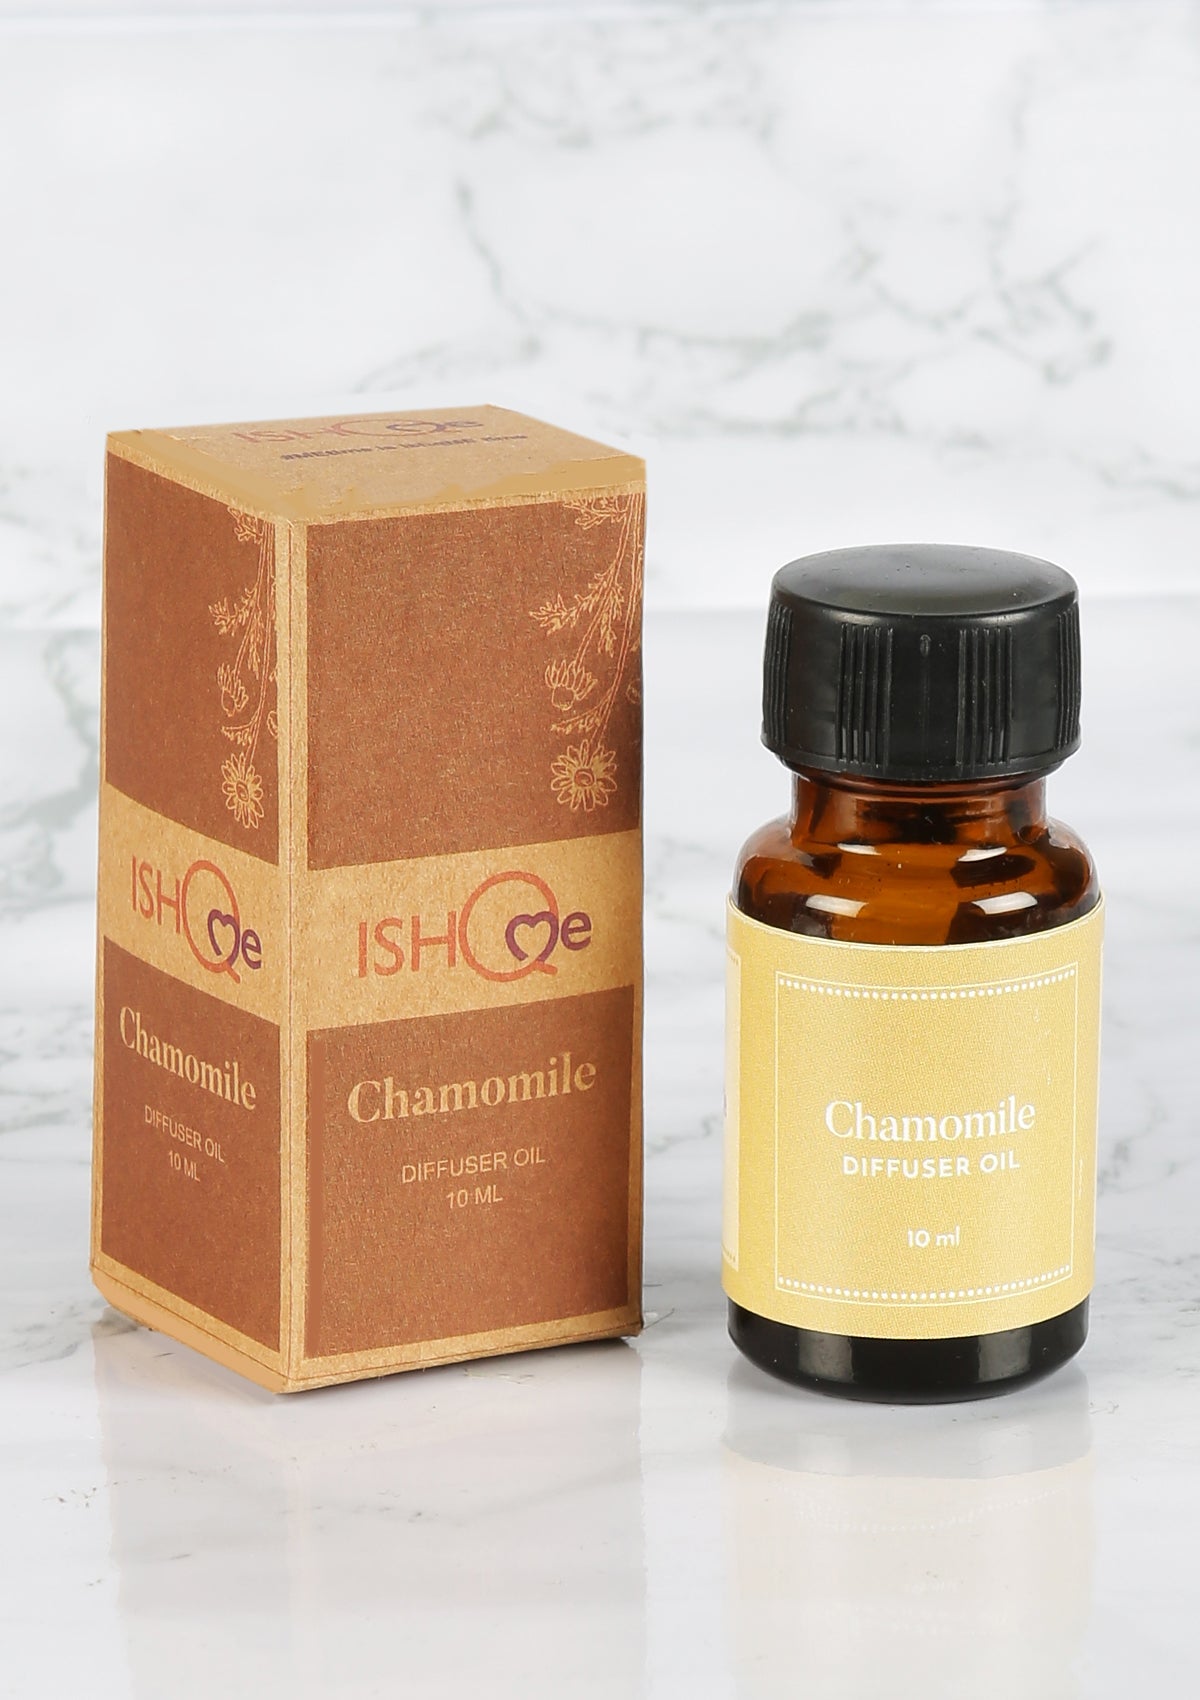 IshqME Soothing aroma Scents Ensemble: Ceramic Oil Diffuser & Essential Oil Selection - IshqMe